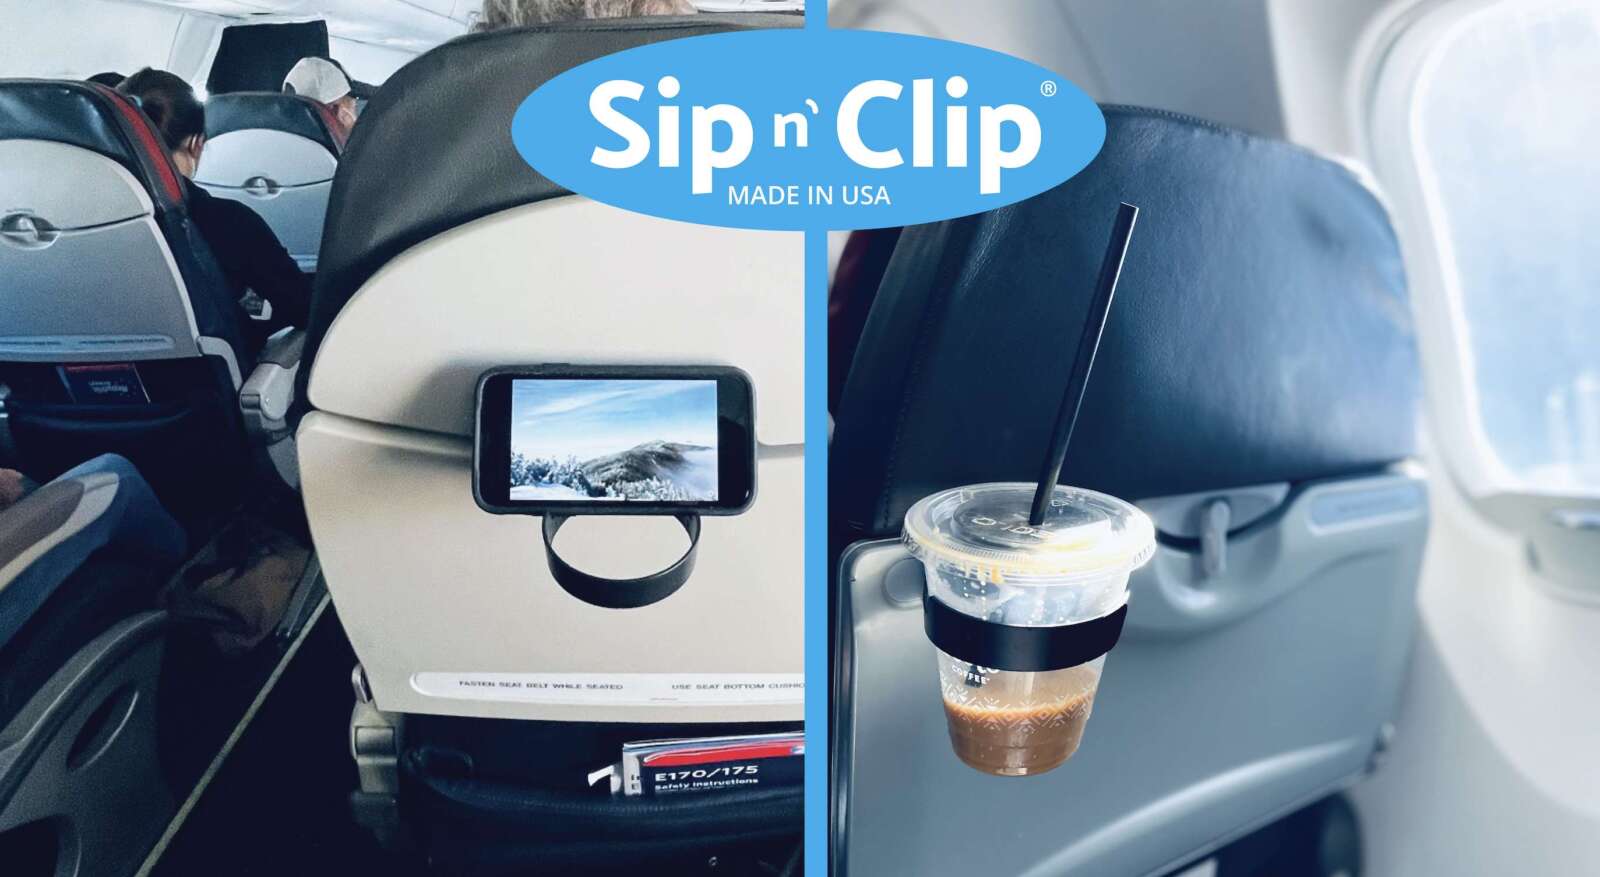 Cup Holder on Airplane Seat Stock Image - Image of drink, beverage:  142104475